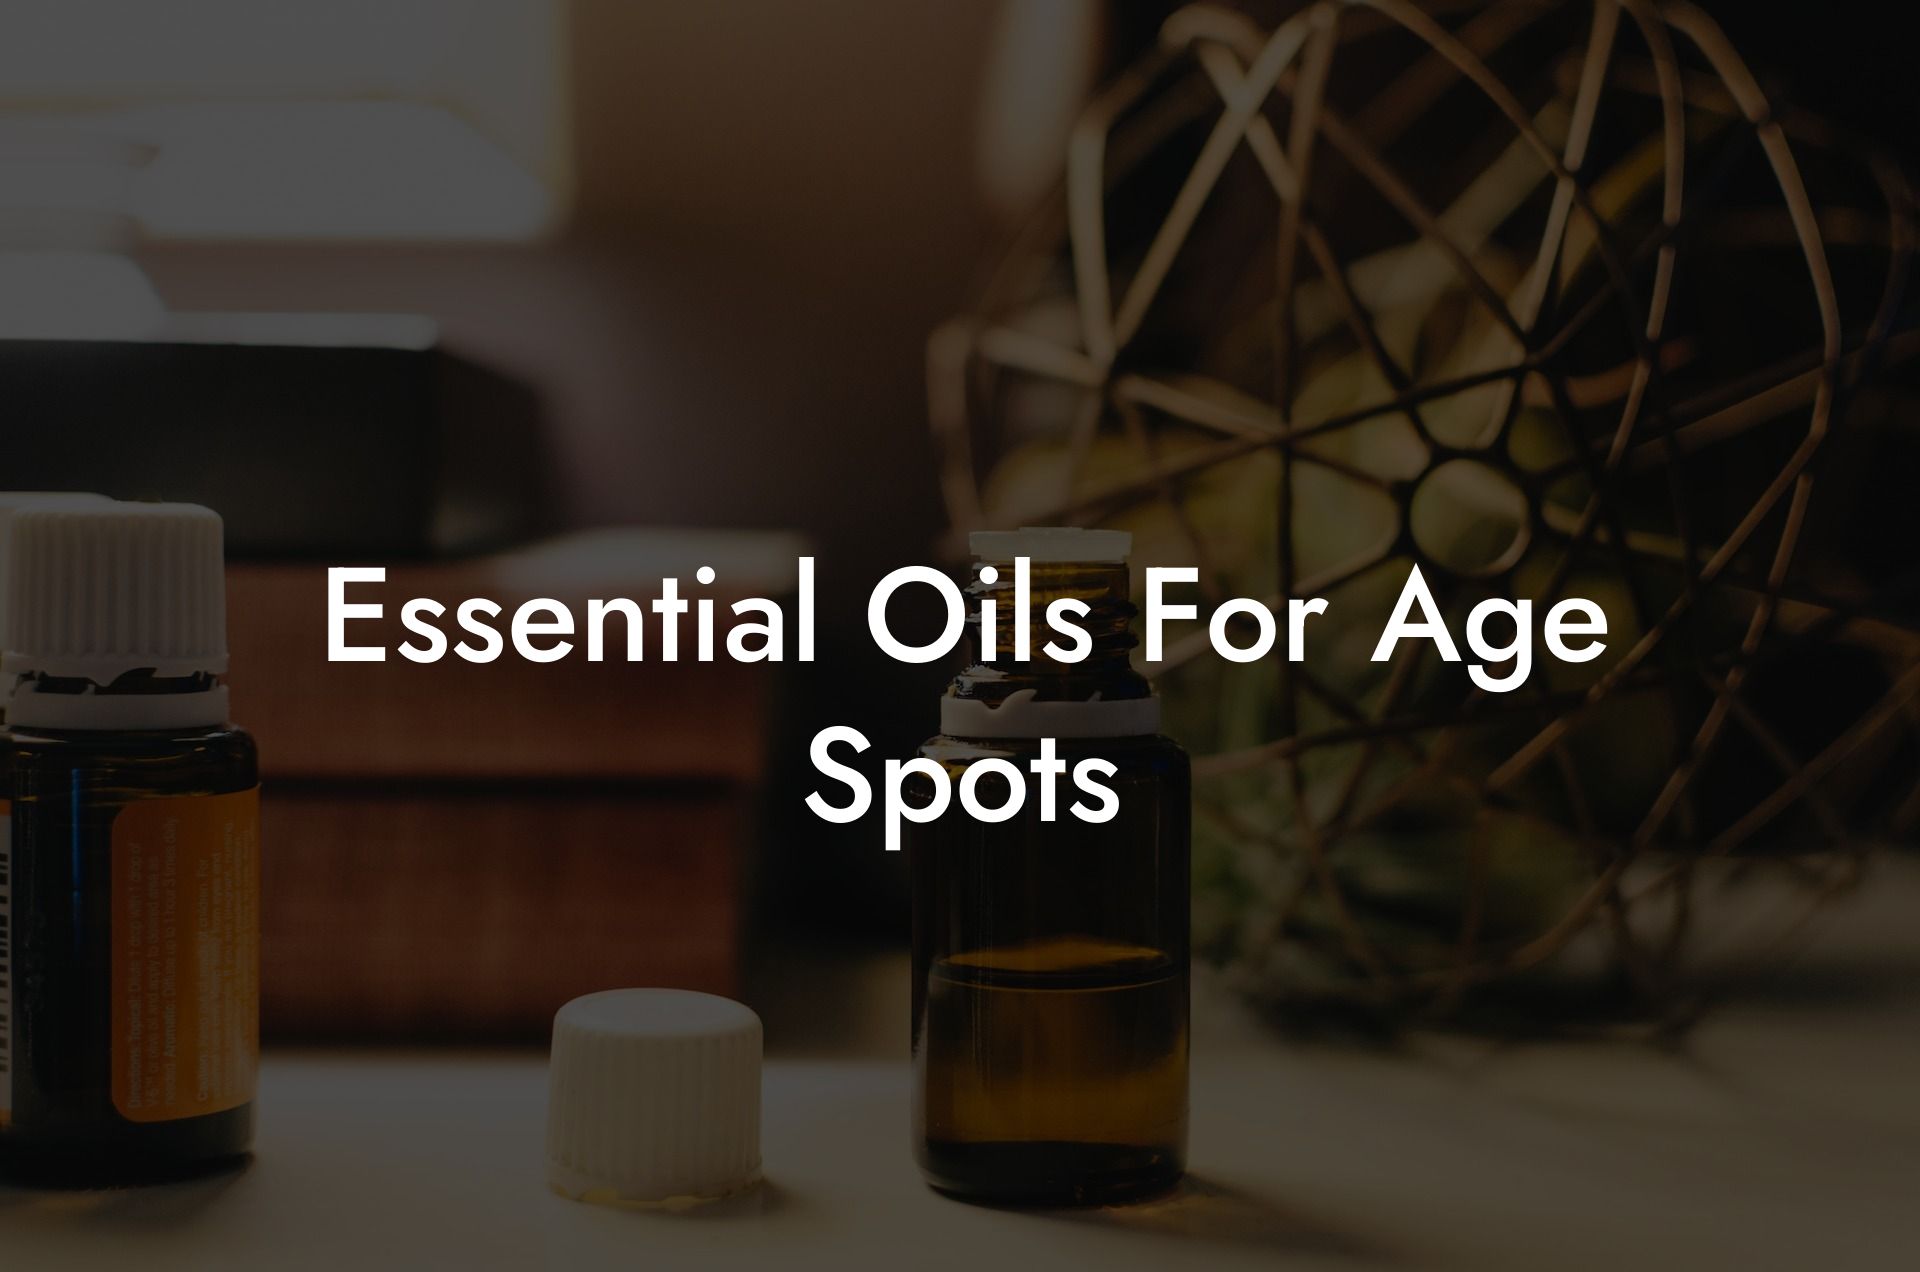 Essential Oils For Age Spots